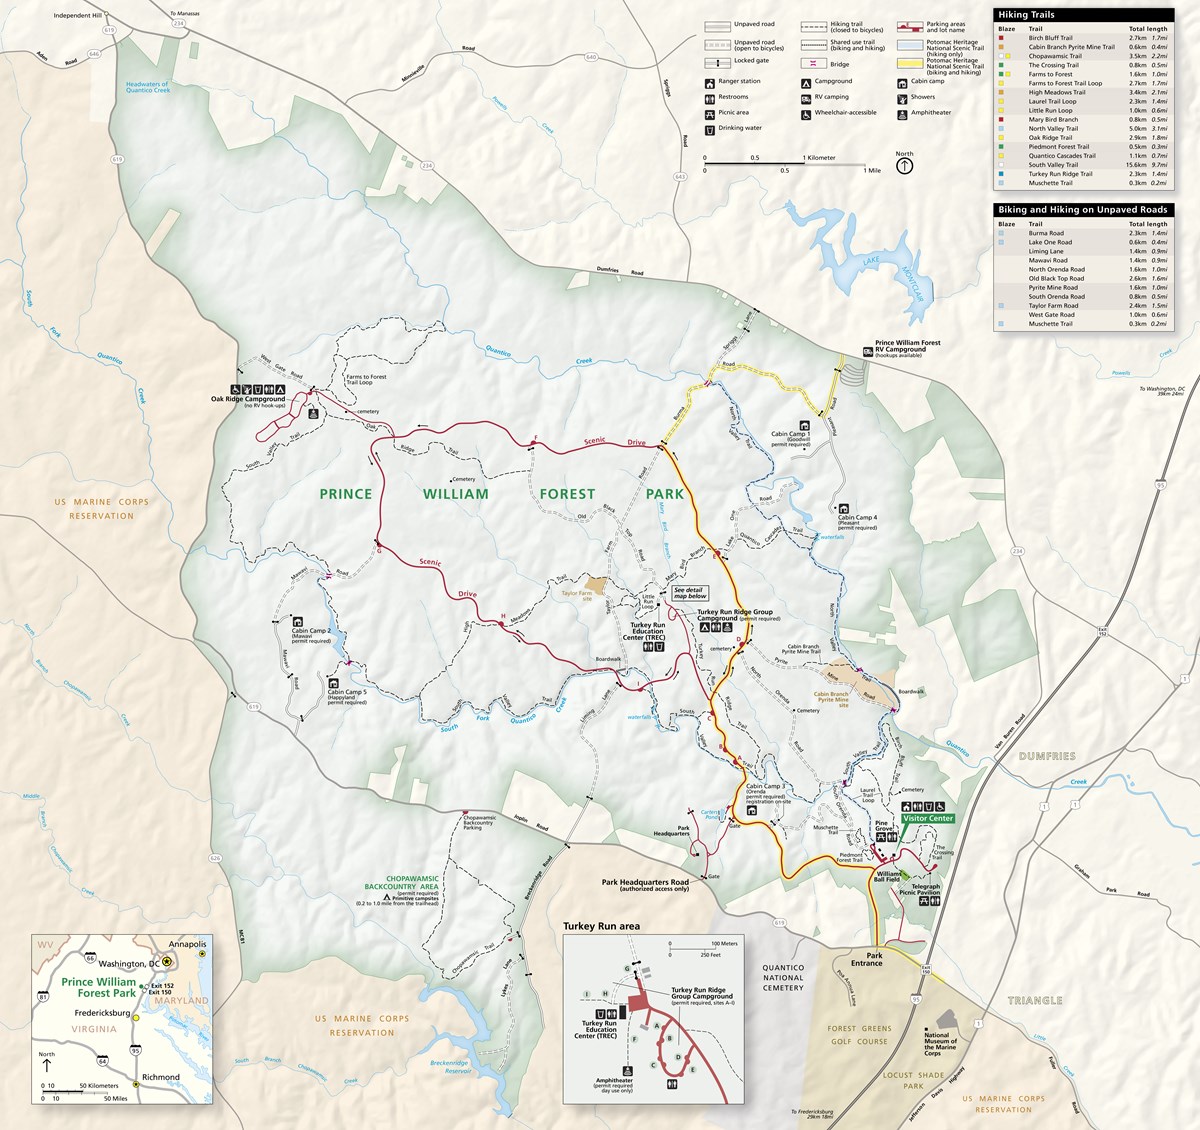 NPS map of Prince William Forest Park